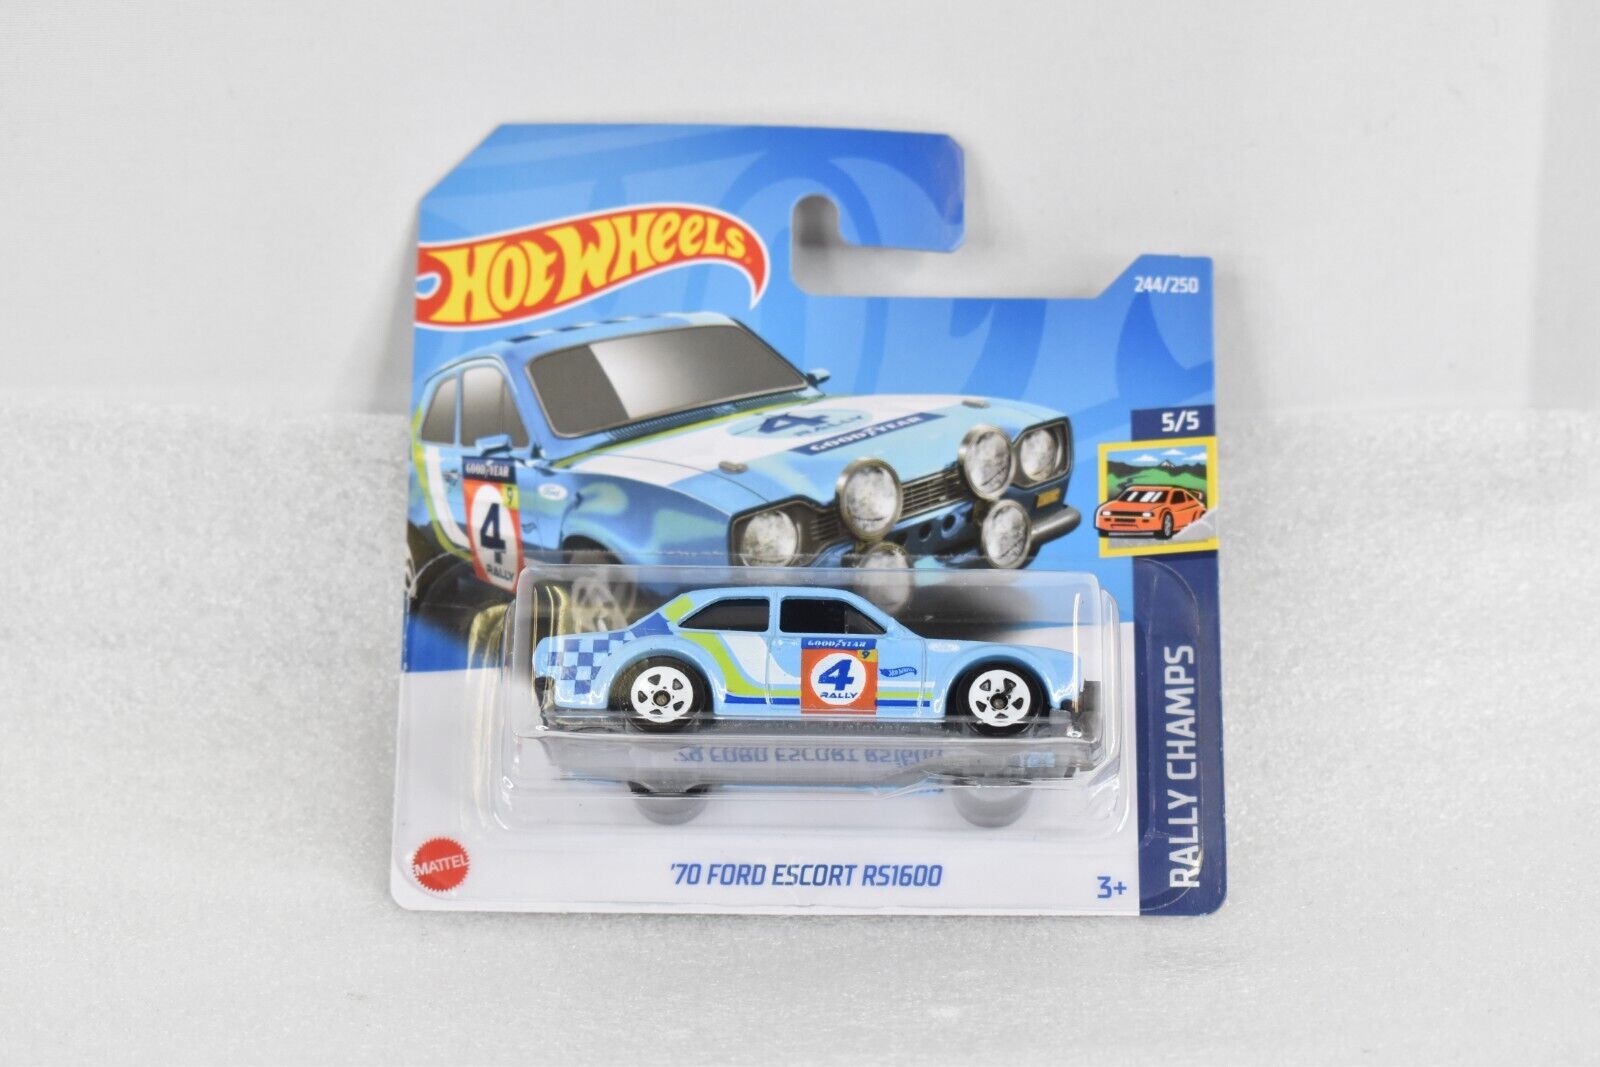 2022 Hot Wheels 70 Ford Escort RS 1600 Short Card HW Rally Champs 244/250